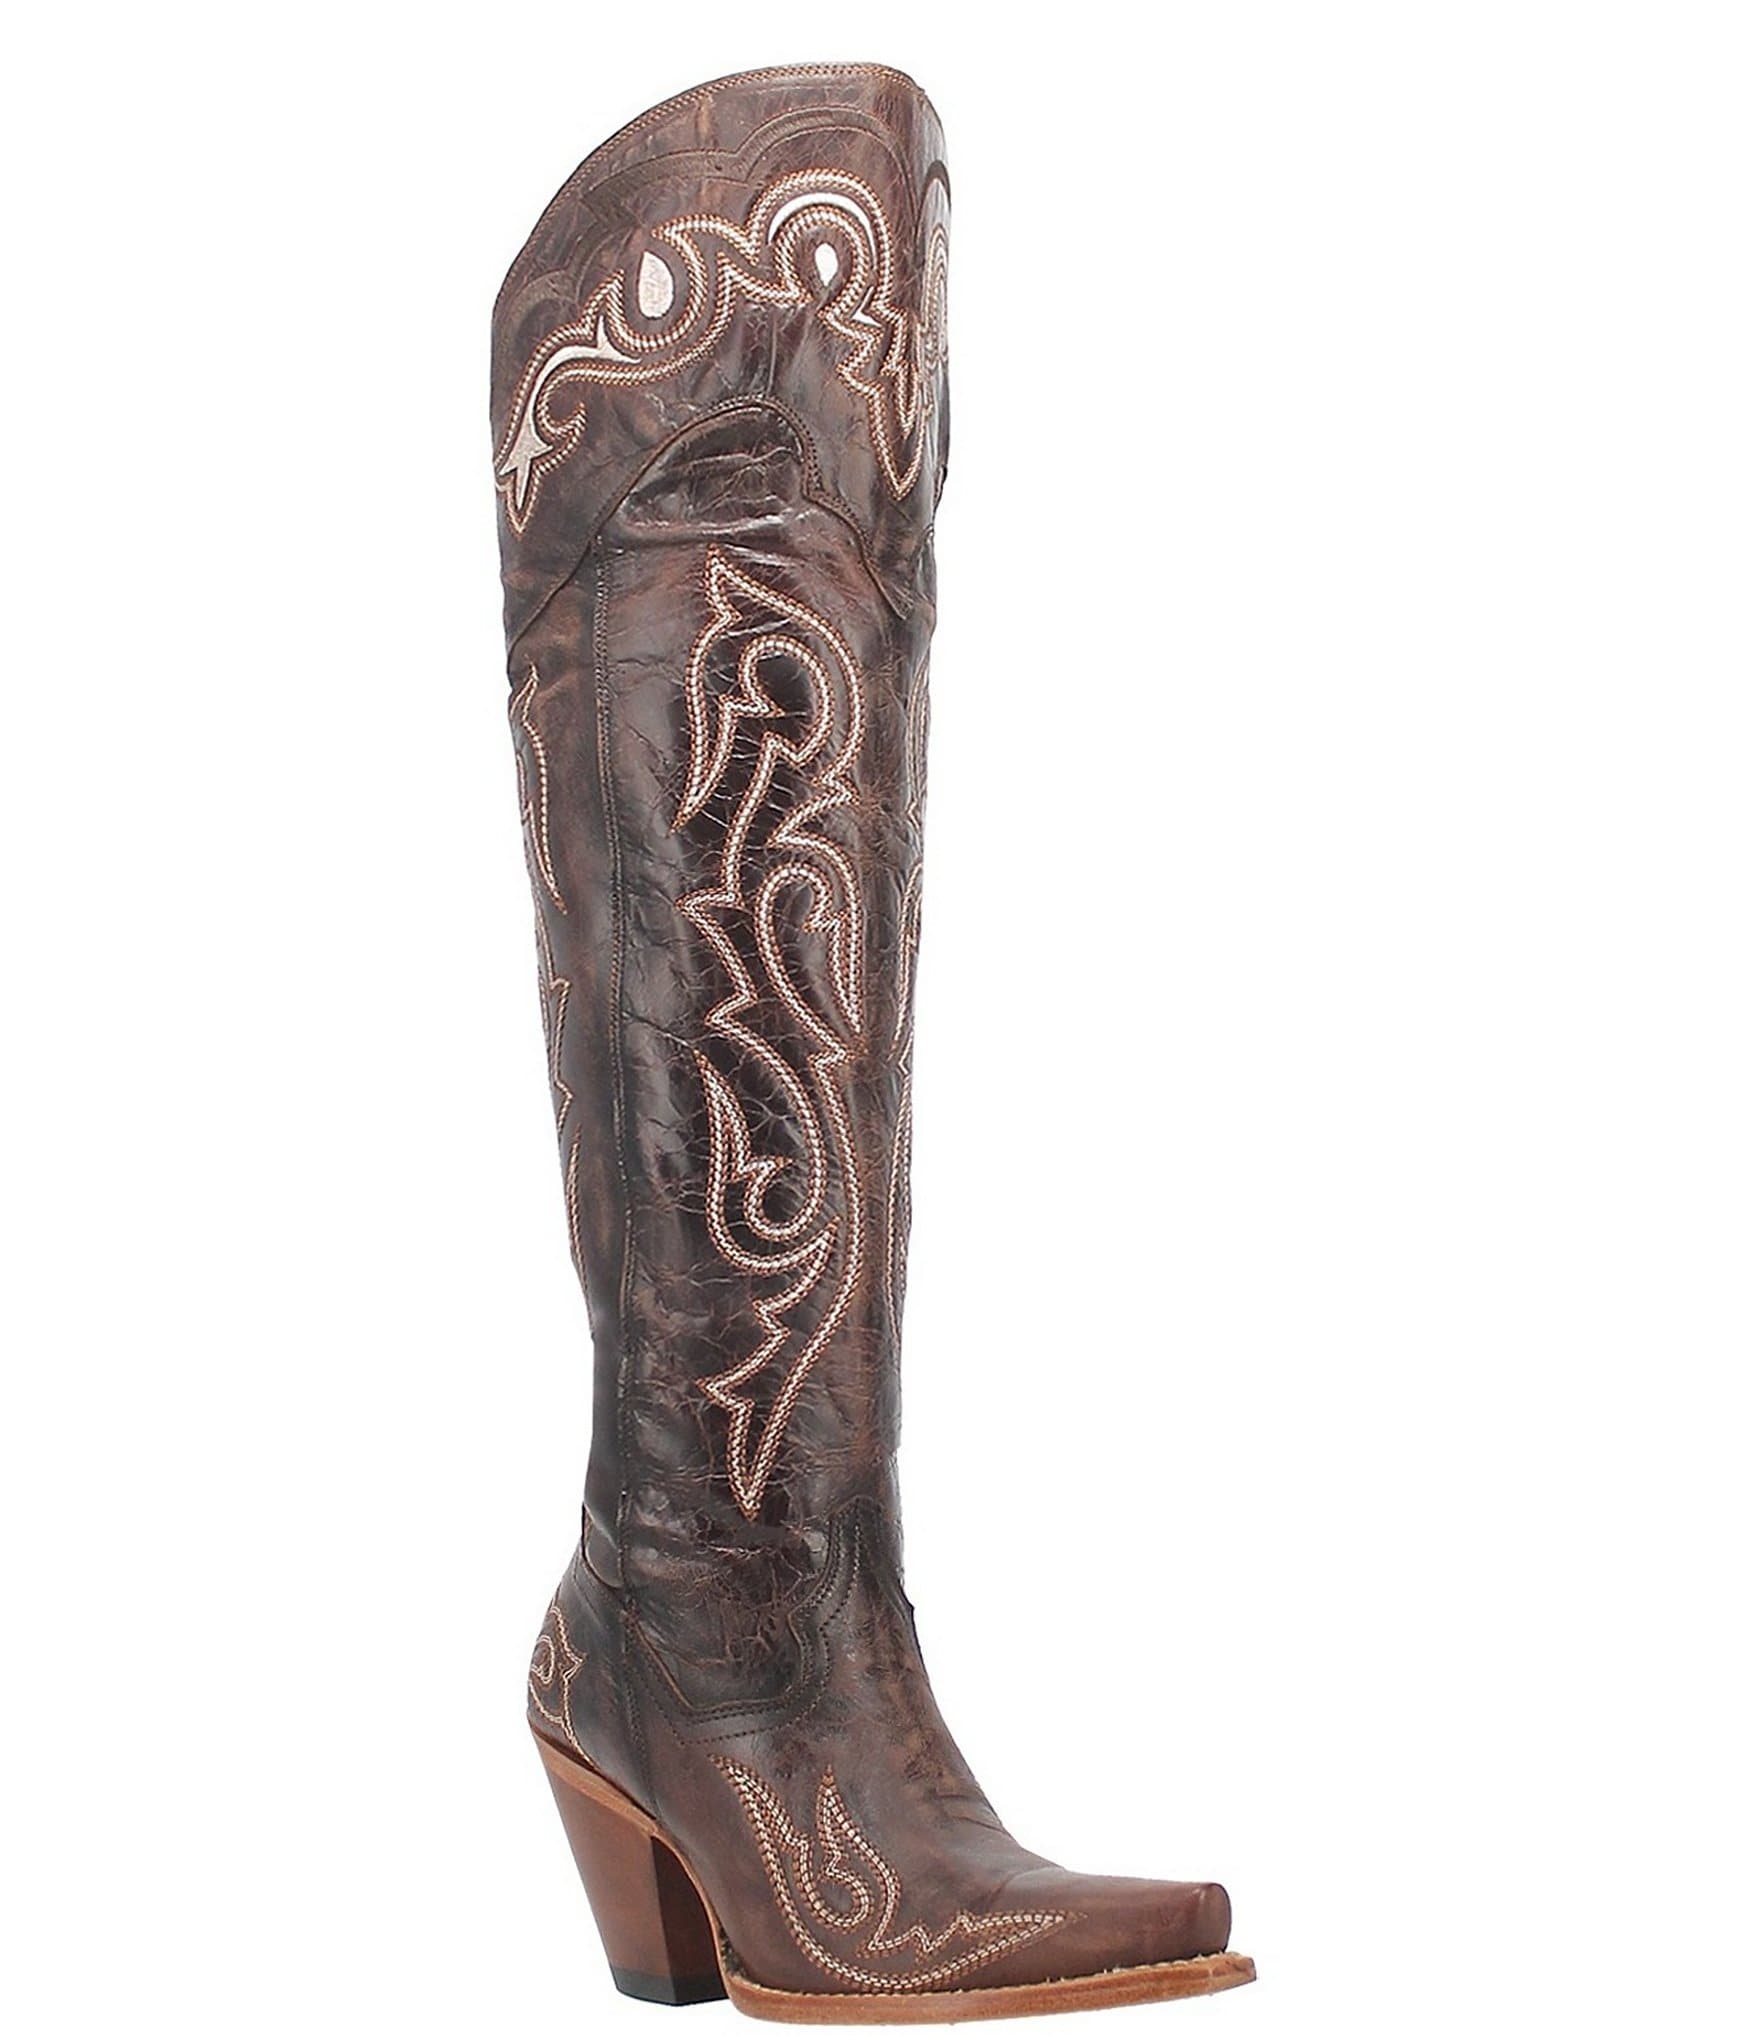 Dan Post Kommotion Leather Over-the-Knee Western Boots | Dillard's